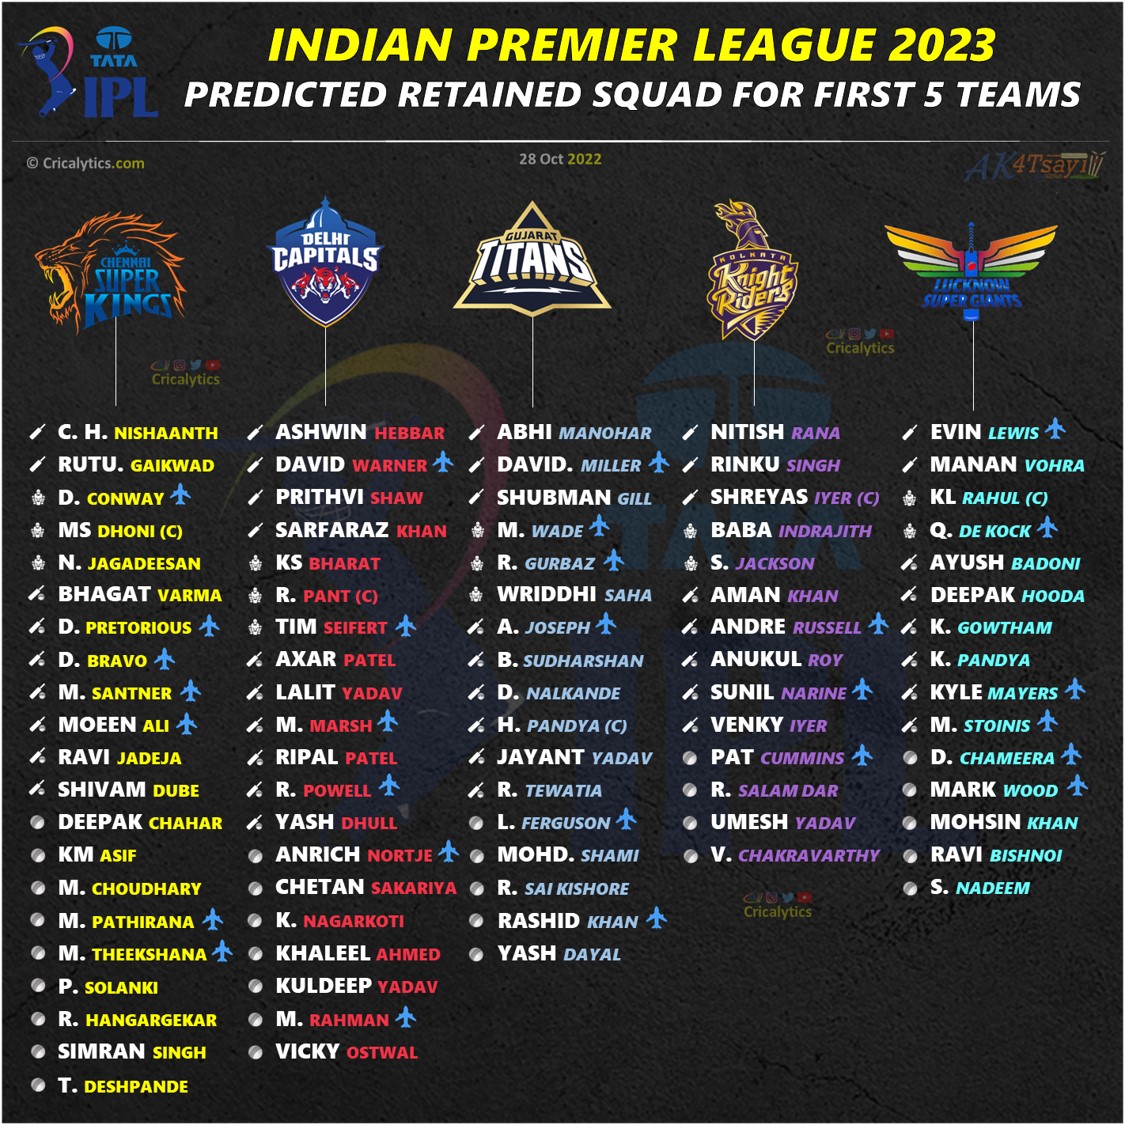 IPL 2023: Confirmed Retained Squad and Players List for all 10 Teams